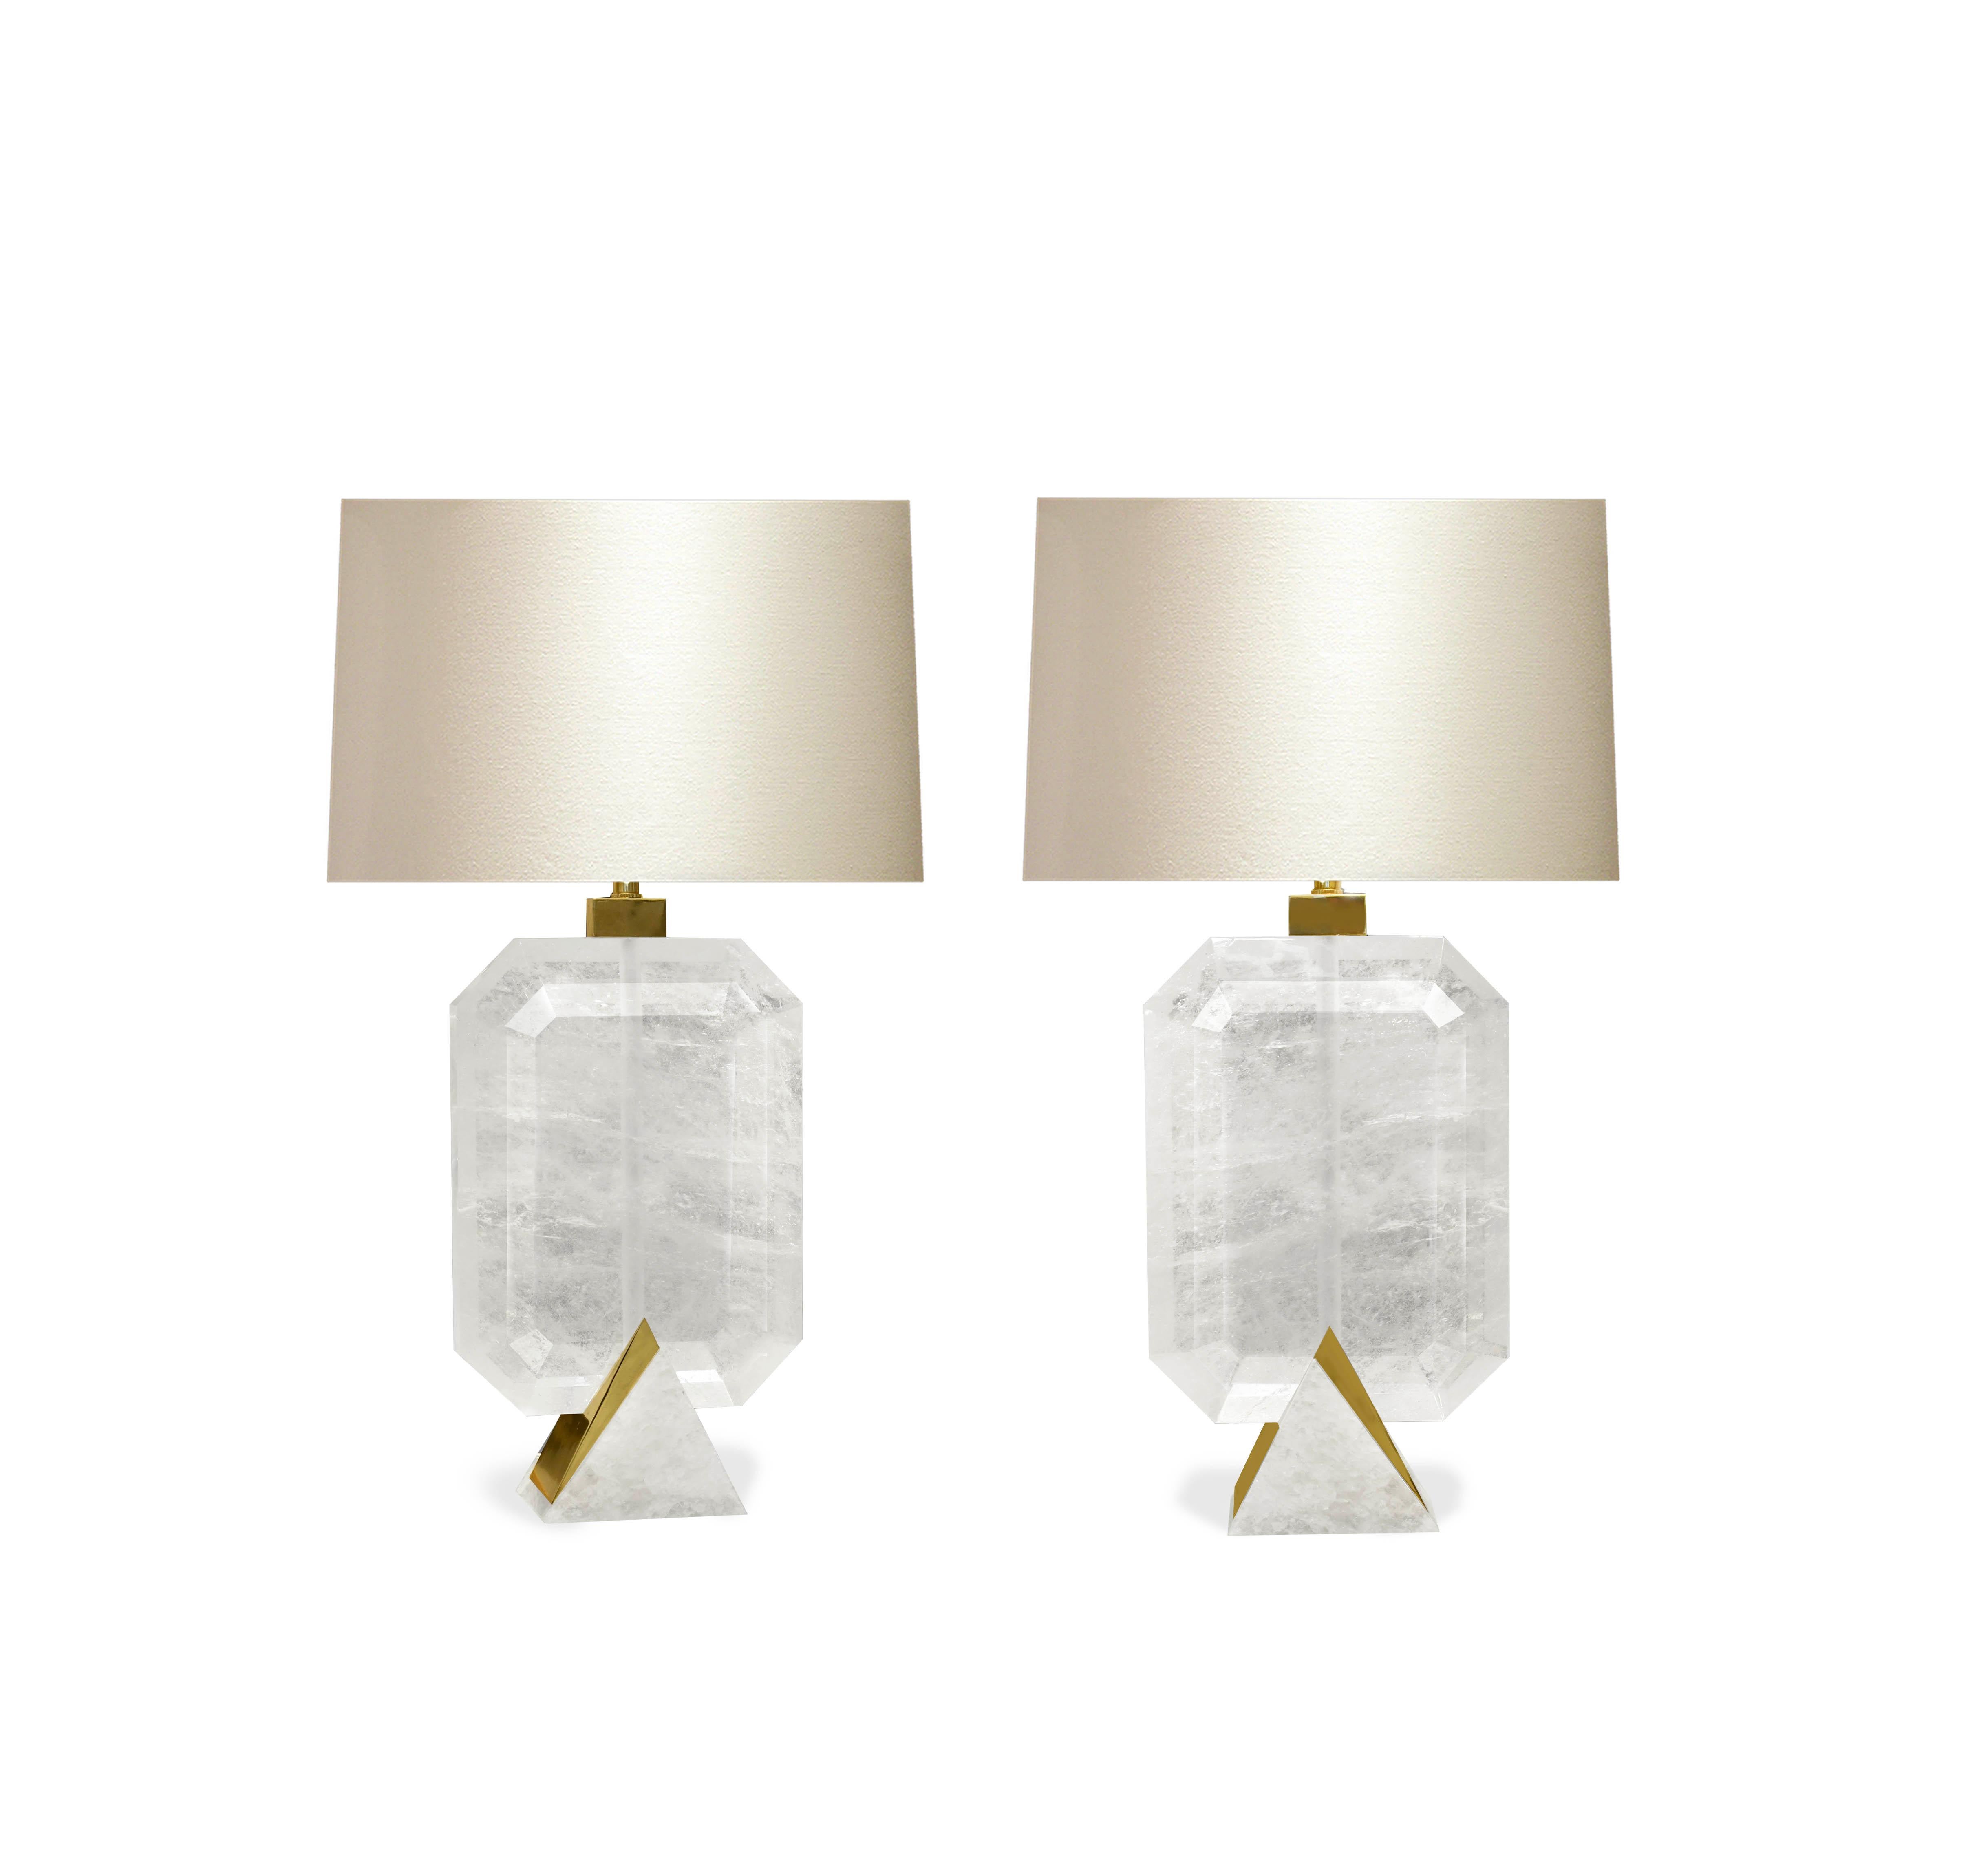 A pair of fine carved diamond form rock crystal lamps with polished brass bases. Created by Phoenix Gallery.
Each lamp installs 2 sockets.
To the top of rock crystal height: 13.5 inch.
(Lampshade not included).